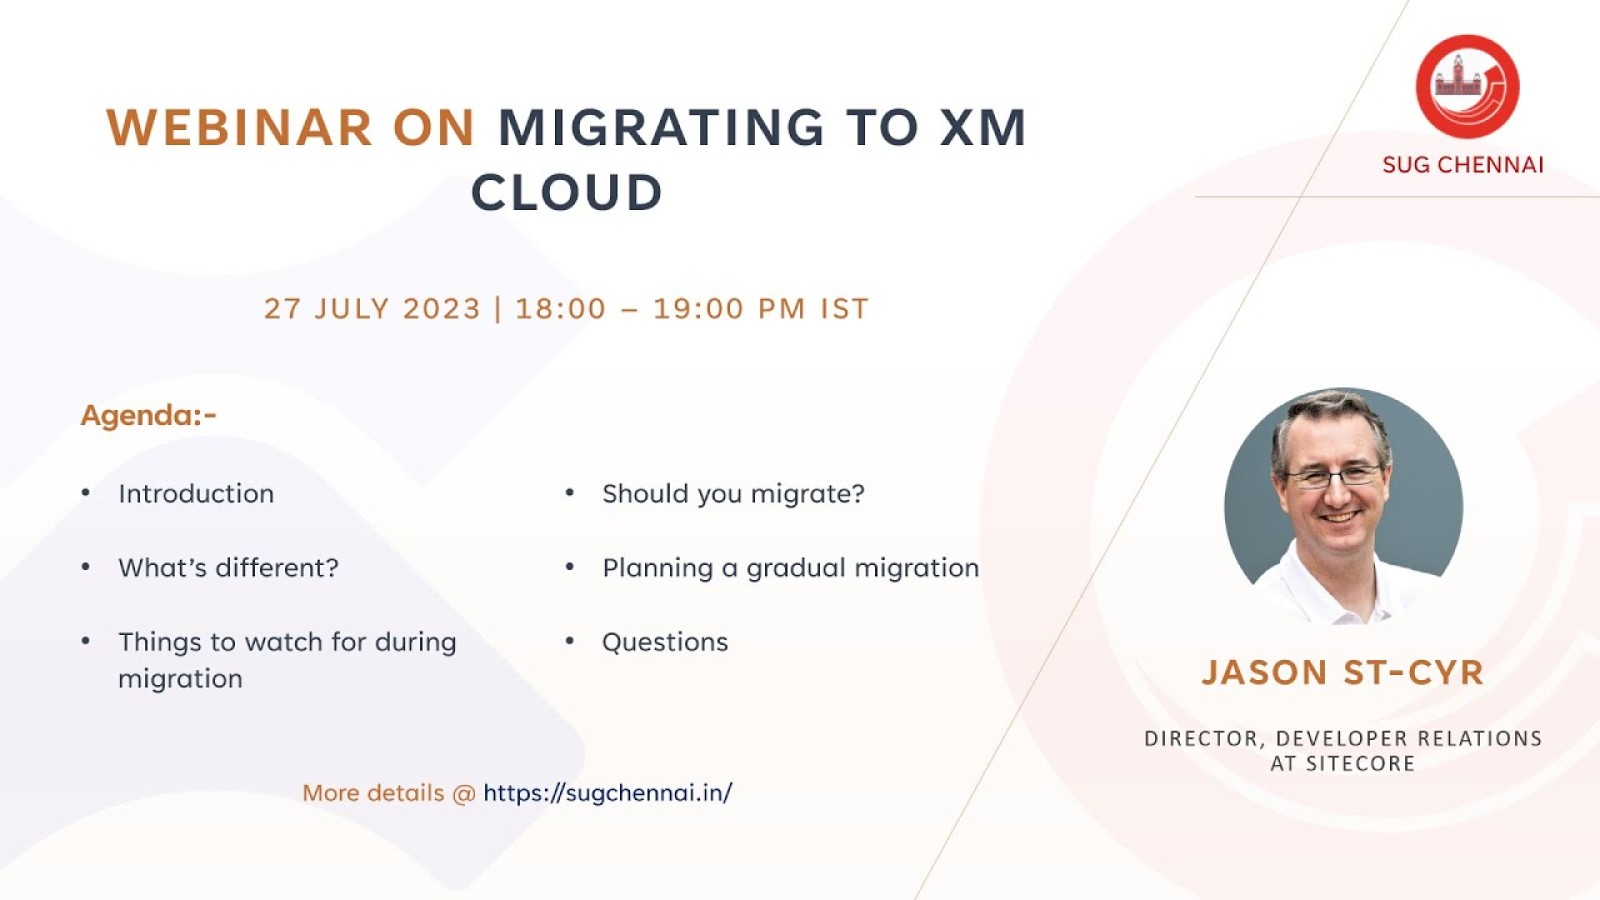 The future is now: Migrating to XM Cloud